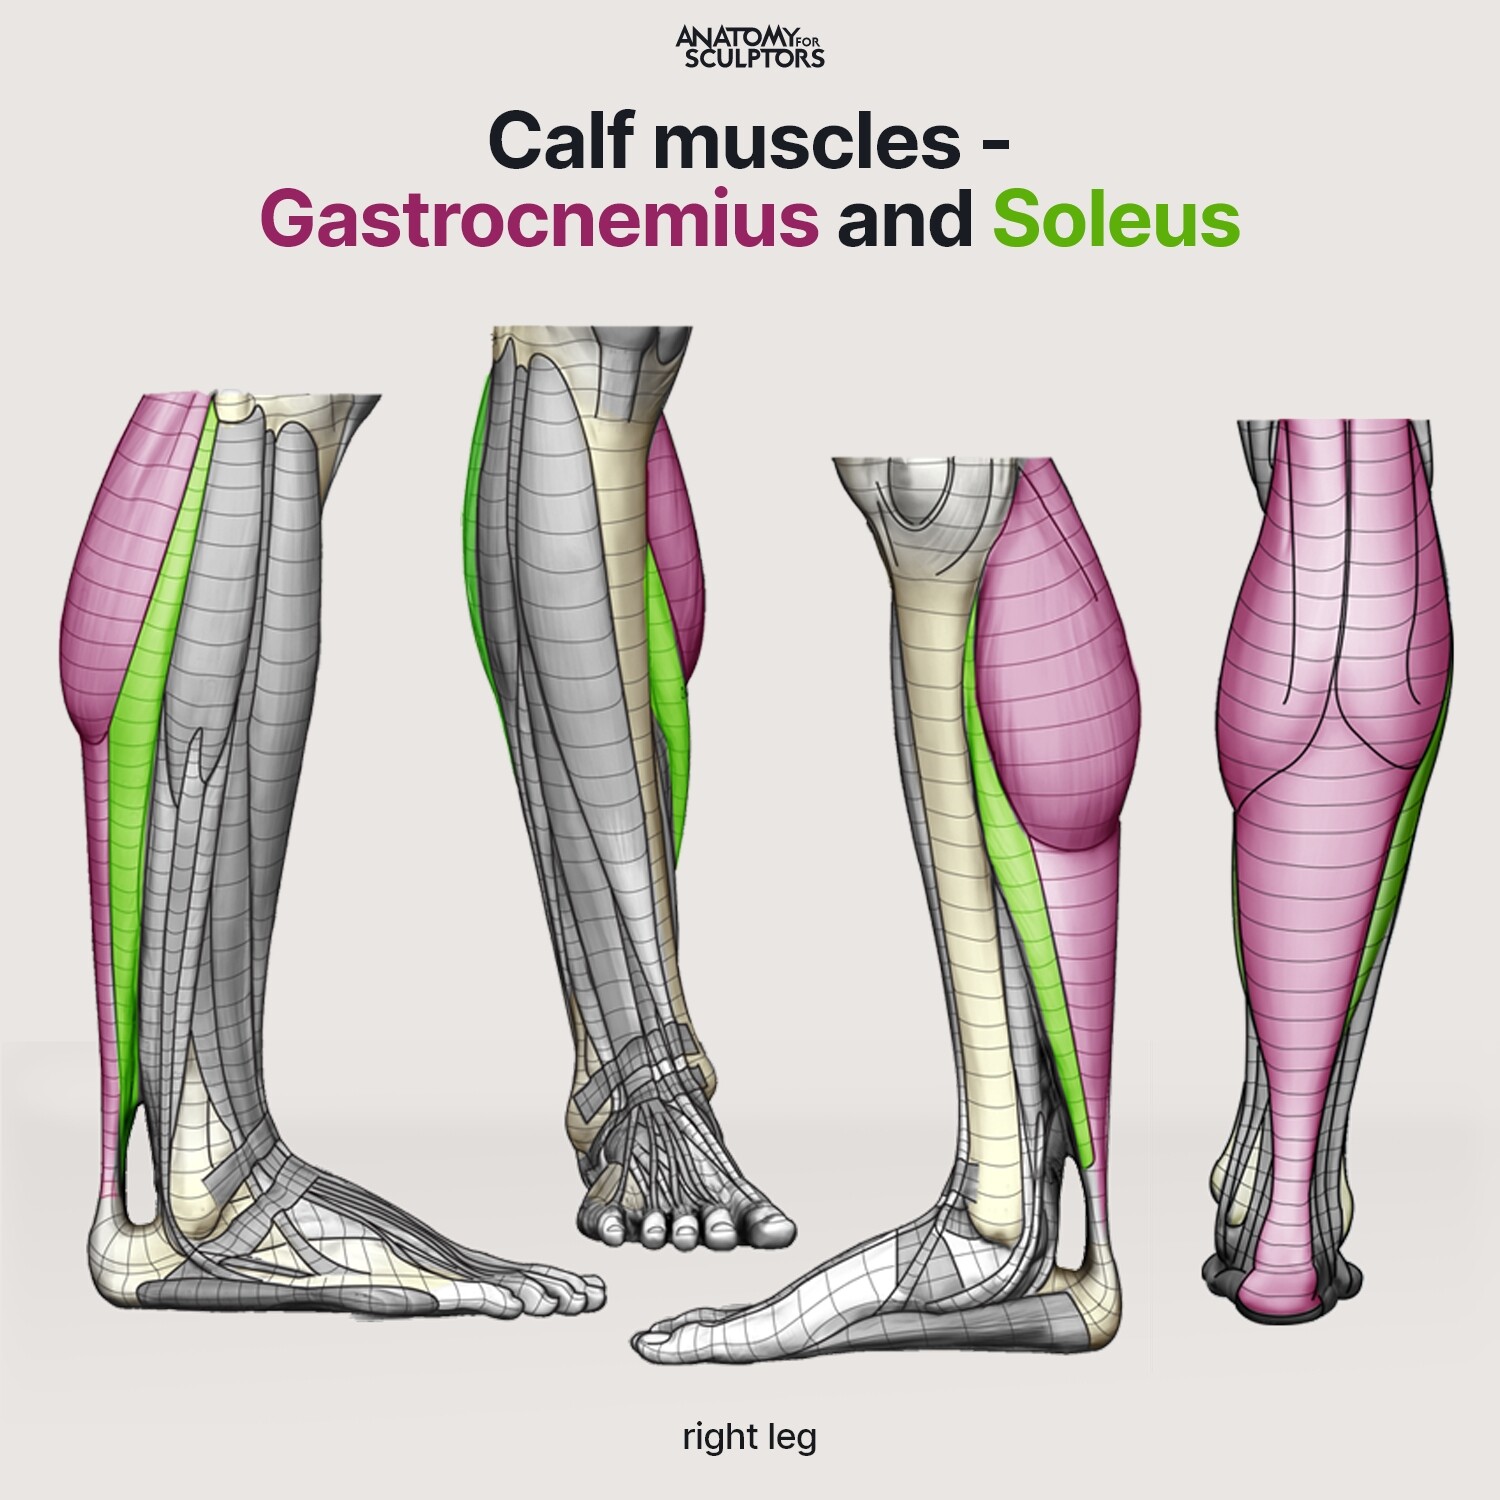 Anatomy For Sculptors - Calf muscles